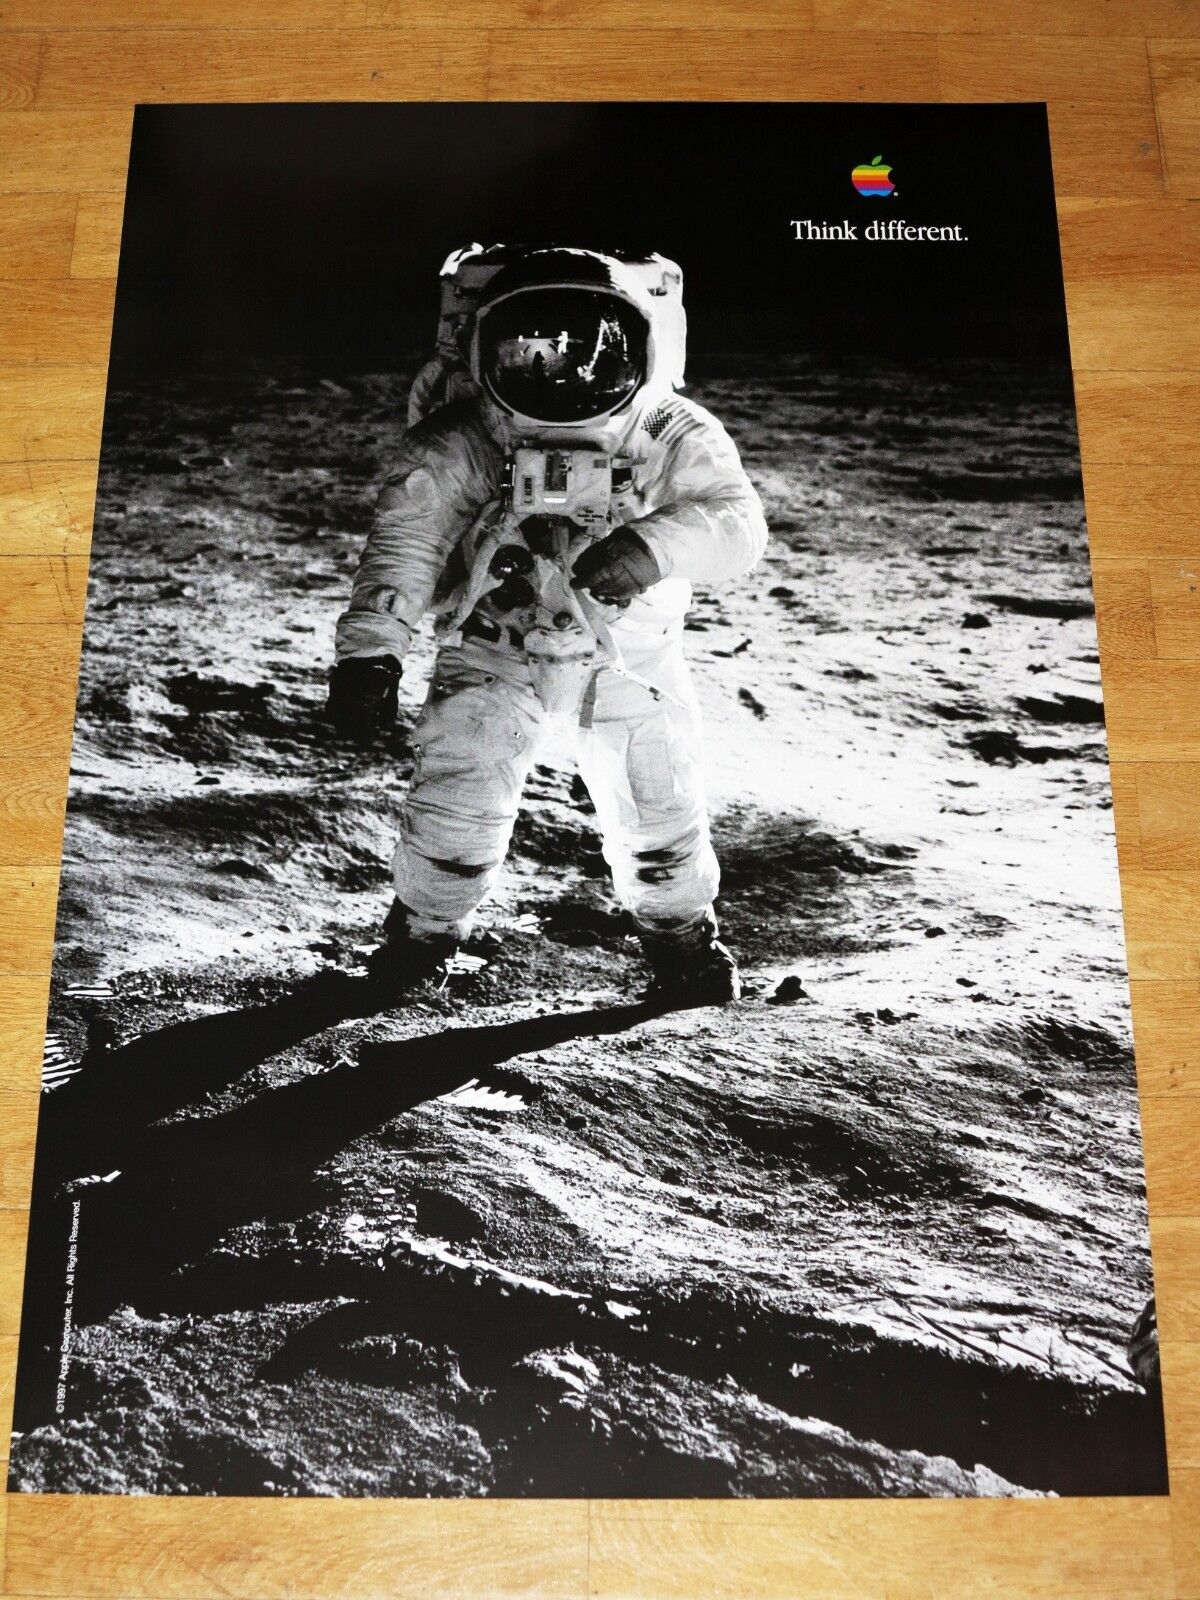 APPLE THINK DIFFERENT POSTER - BUZZ ALDRIN / 24 x 36 by STEVE JOBS 91 x 61 cm